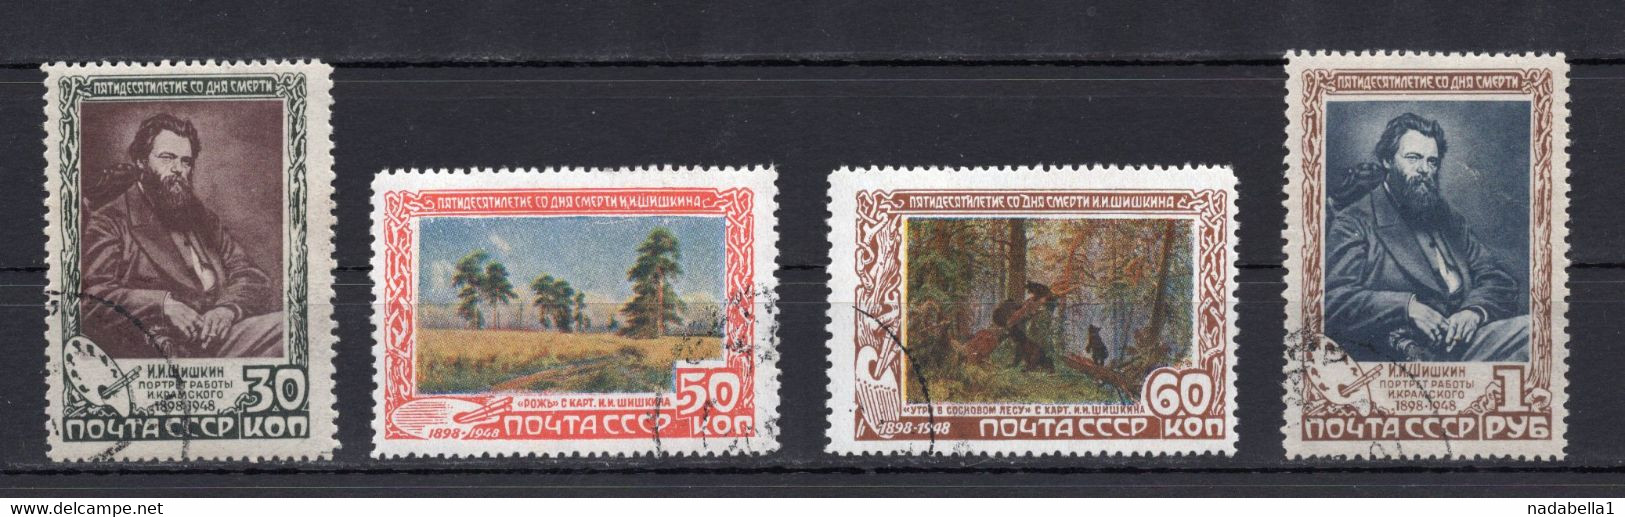 1948  RUSSIA, SOVIET, SHISHKIN, 50 YEARS OF DEATH, SET OF 4 STAMPS, USED - Used Stamps